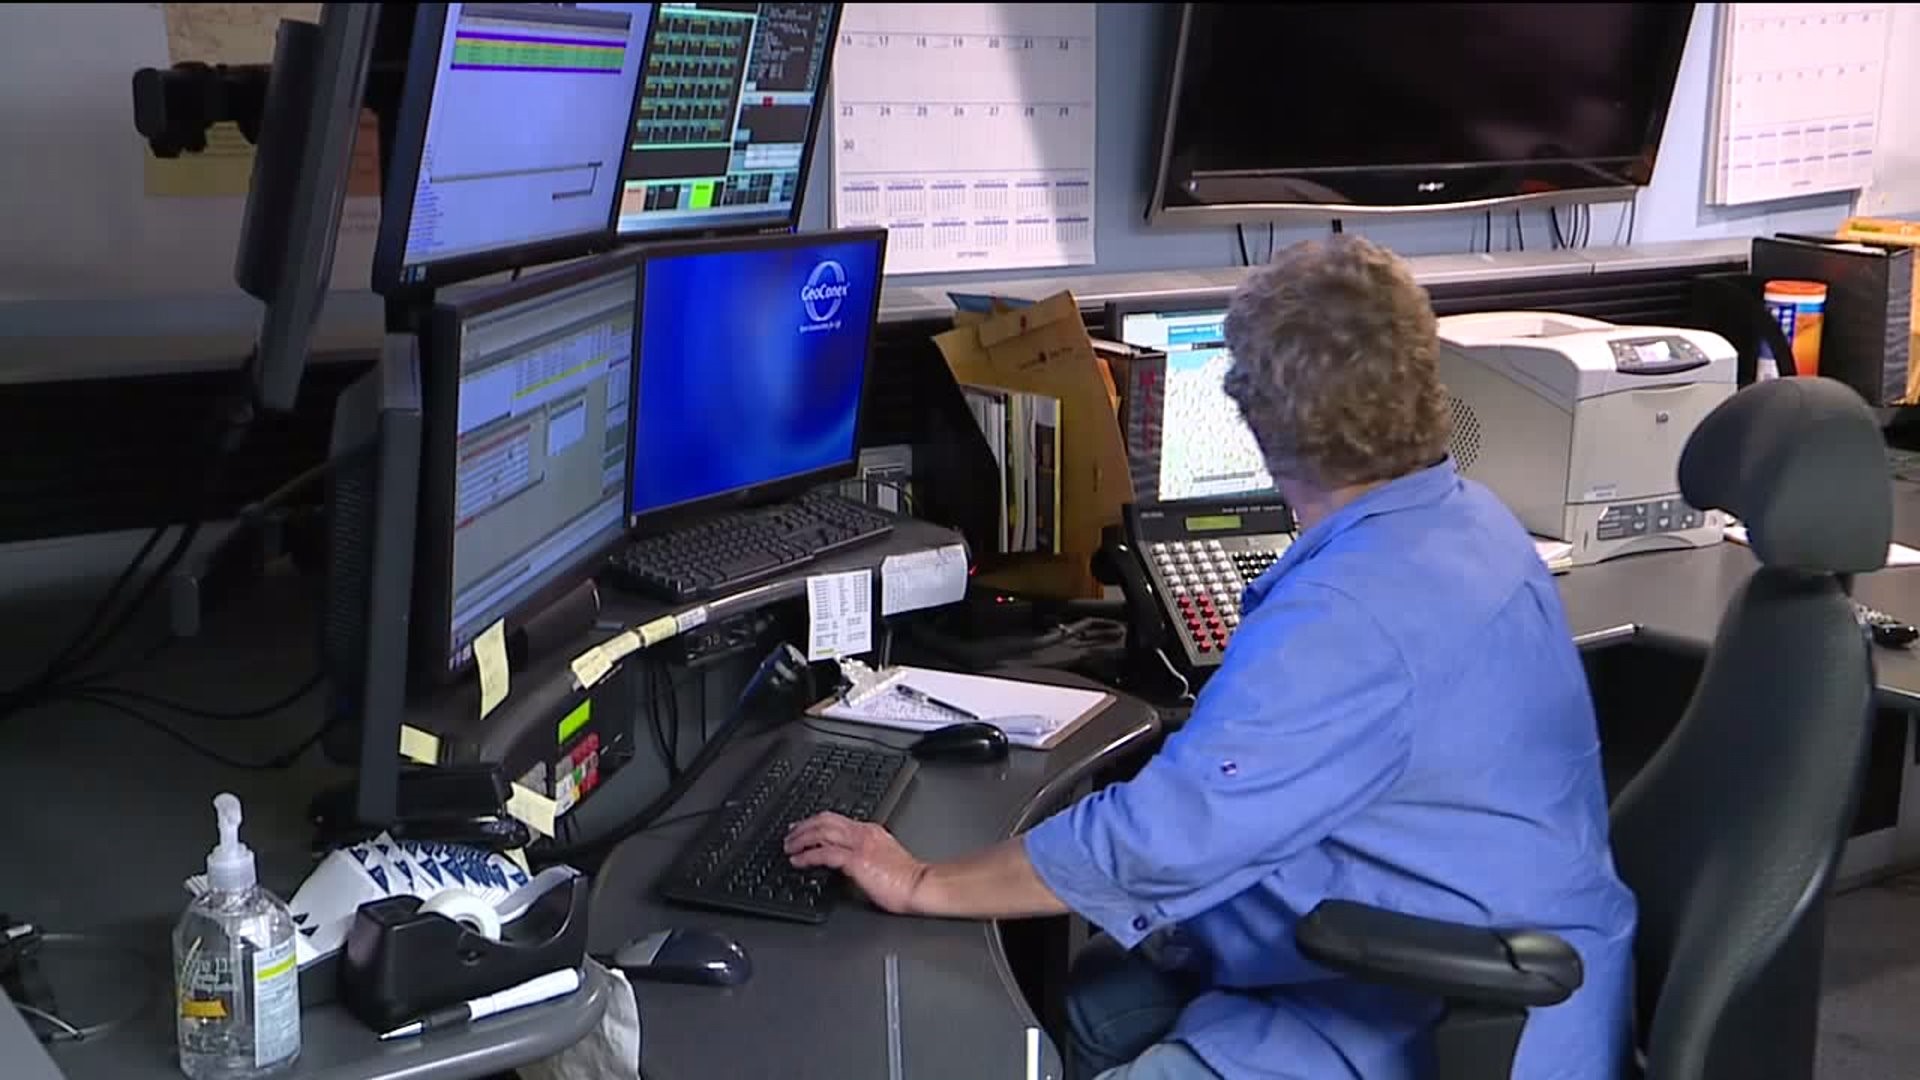 One 911 Center Sees Number of Dispatchers Dwindle